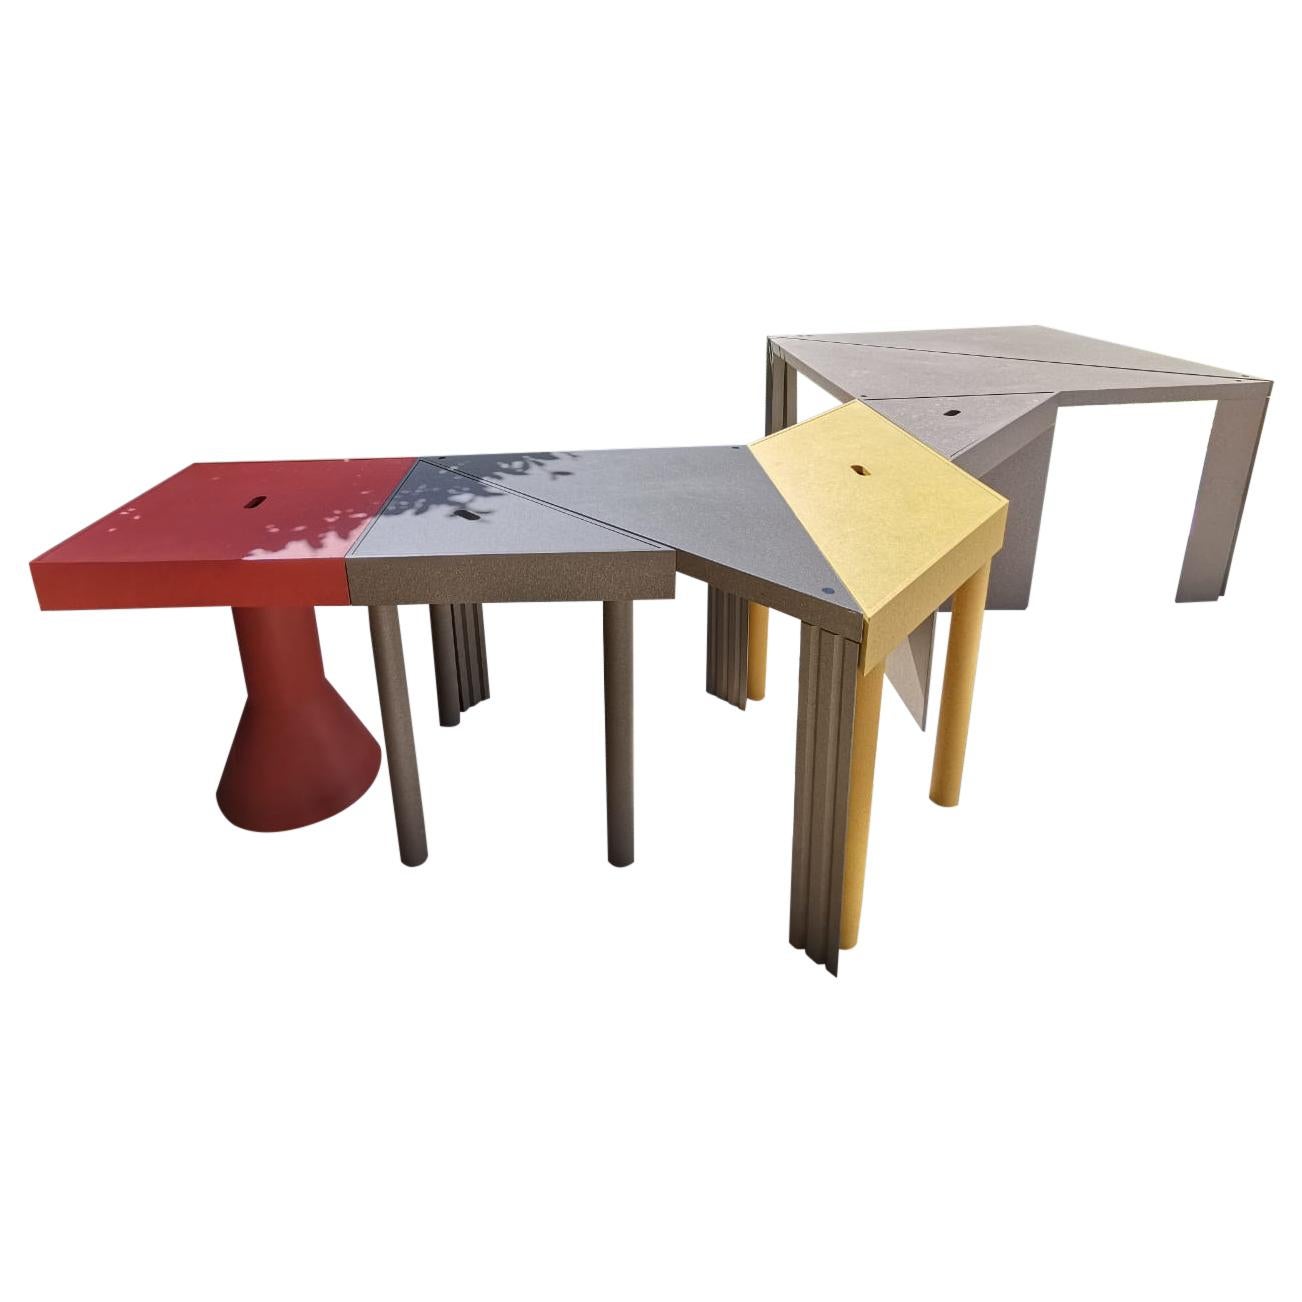 Tangram Set Table by M.Morozzi from Cassina, Italy, 1980s Archizoom 